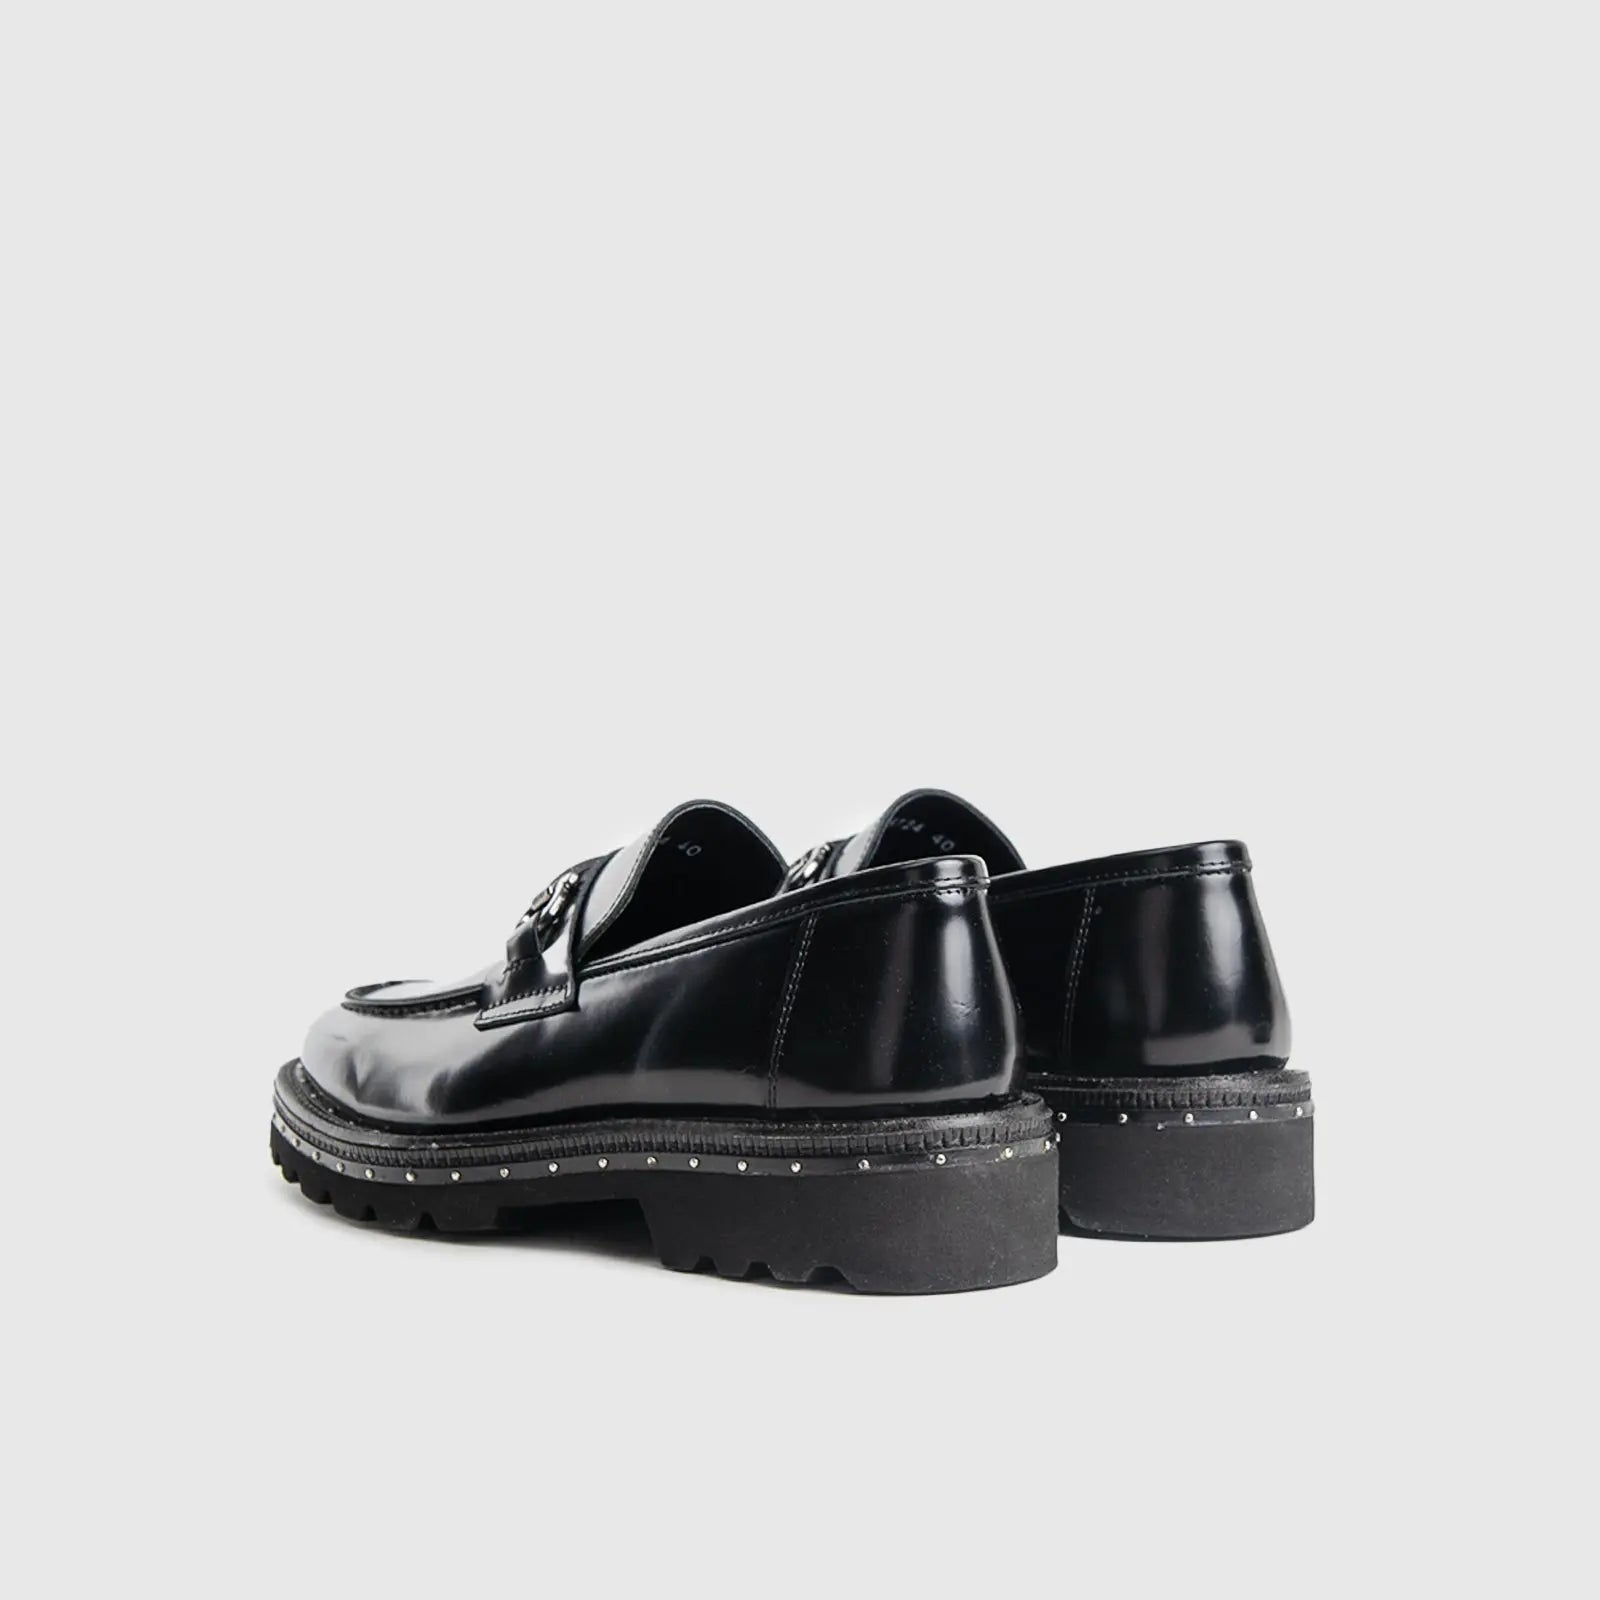 Chunky Sole Dress Loafers Black 4521 Loafers | familyshoecentre